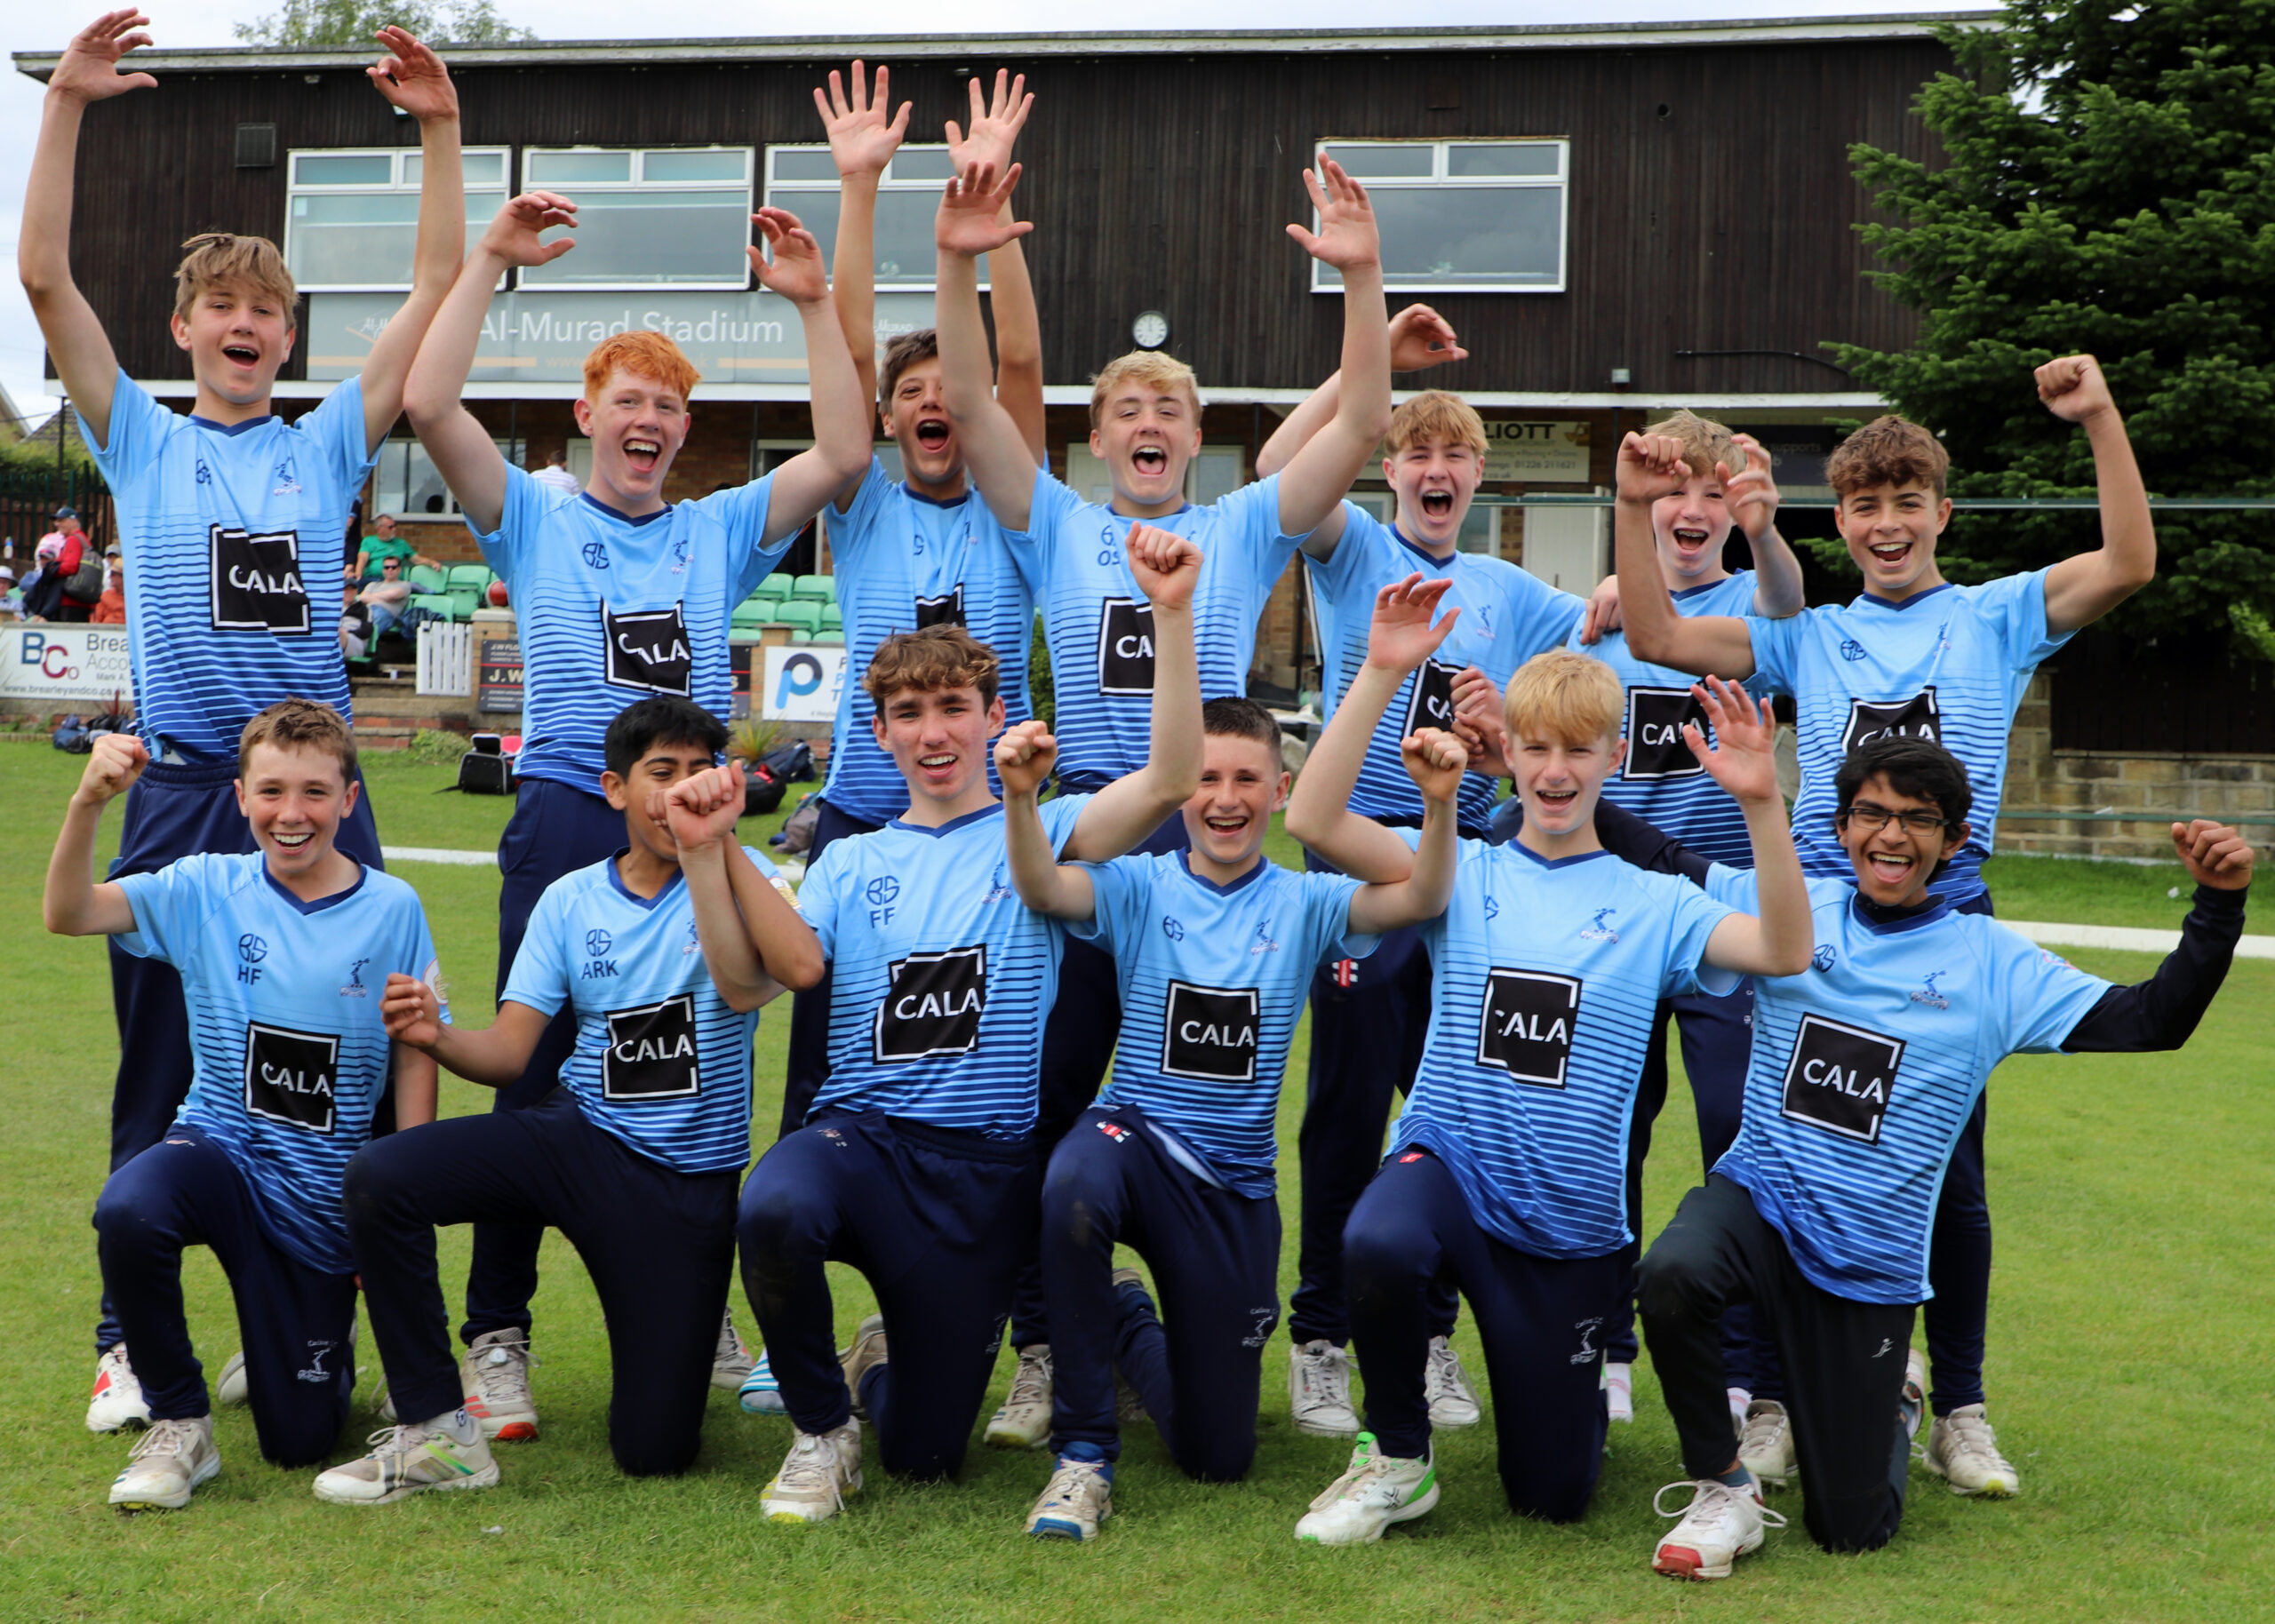 CARLTON U15S SET FOR DATE WITH DESTINY AT LORD’S